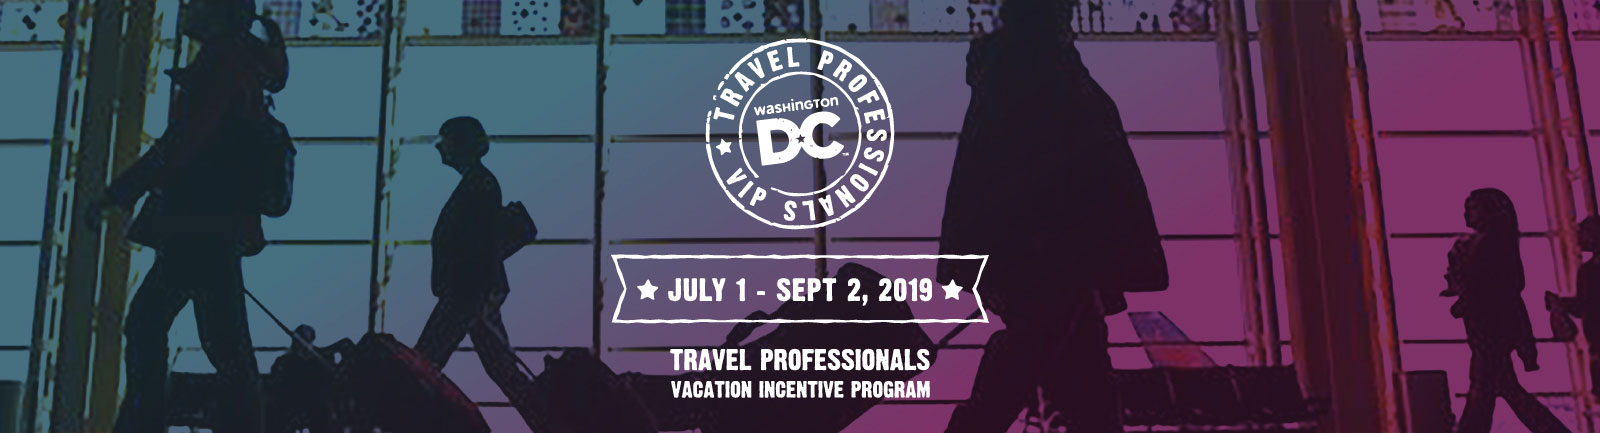 Travel Professionals VIP - Deals, Discounts and More in Washington, DC